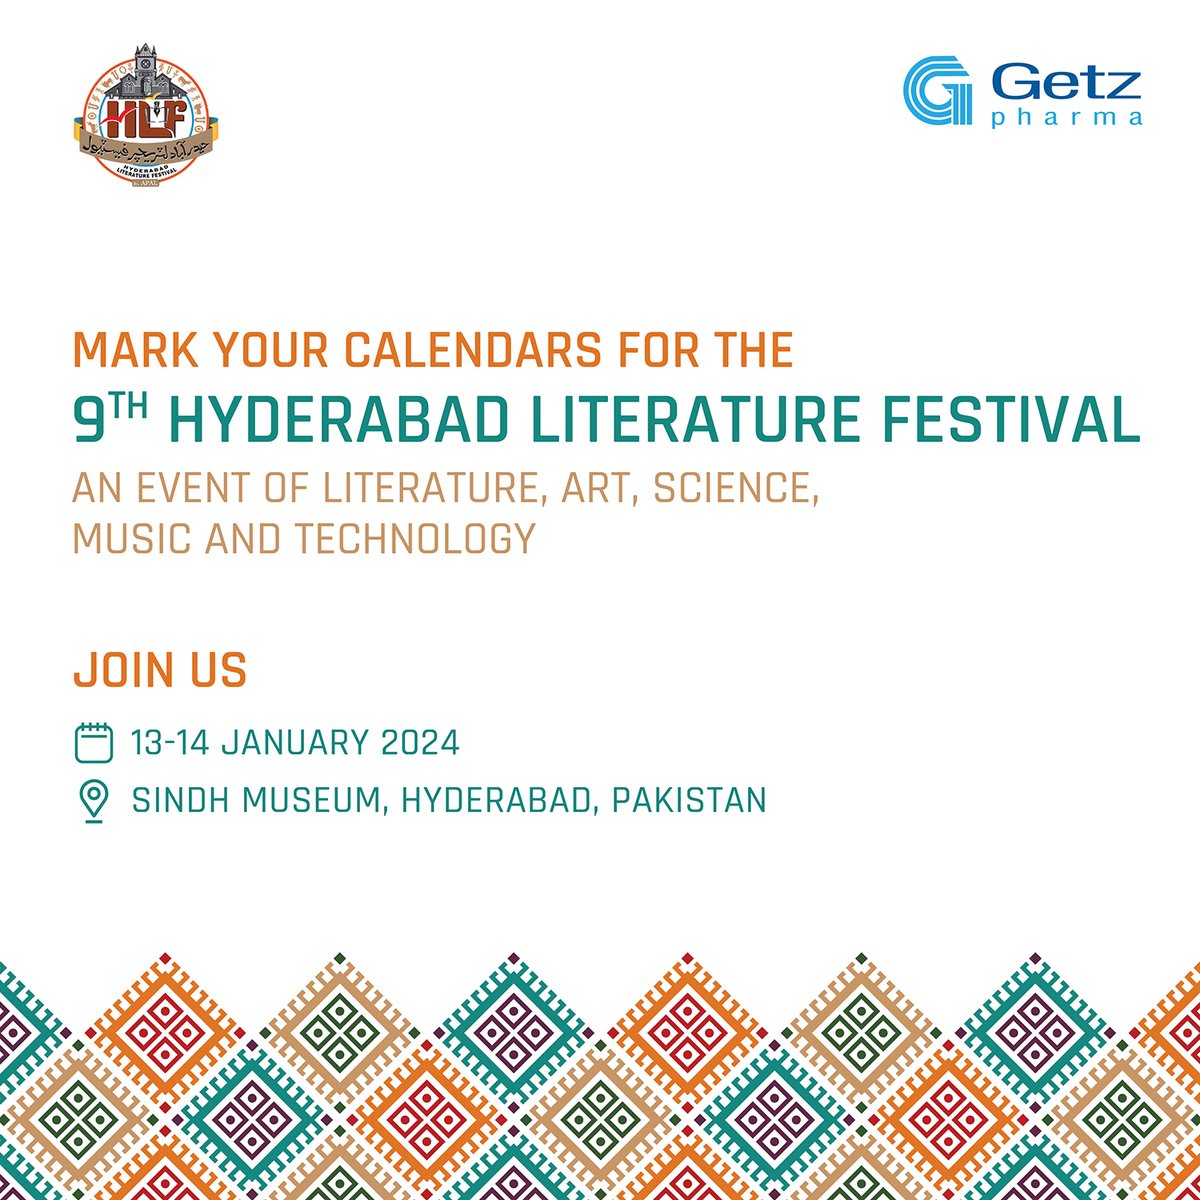 Join us for an event rich with the culture and heritage of Pakistan at the 9th Hyderabad Literature Festival this weekend, taking place from January 13 to 14, 2024, at the Sindh Museum in Hyderabad, Pakistan. #GetzPharma #HLF9